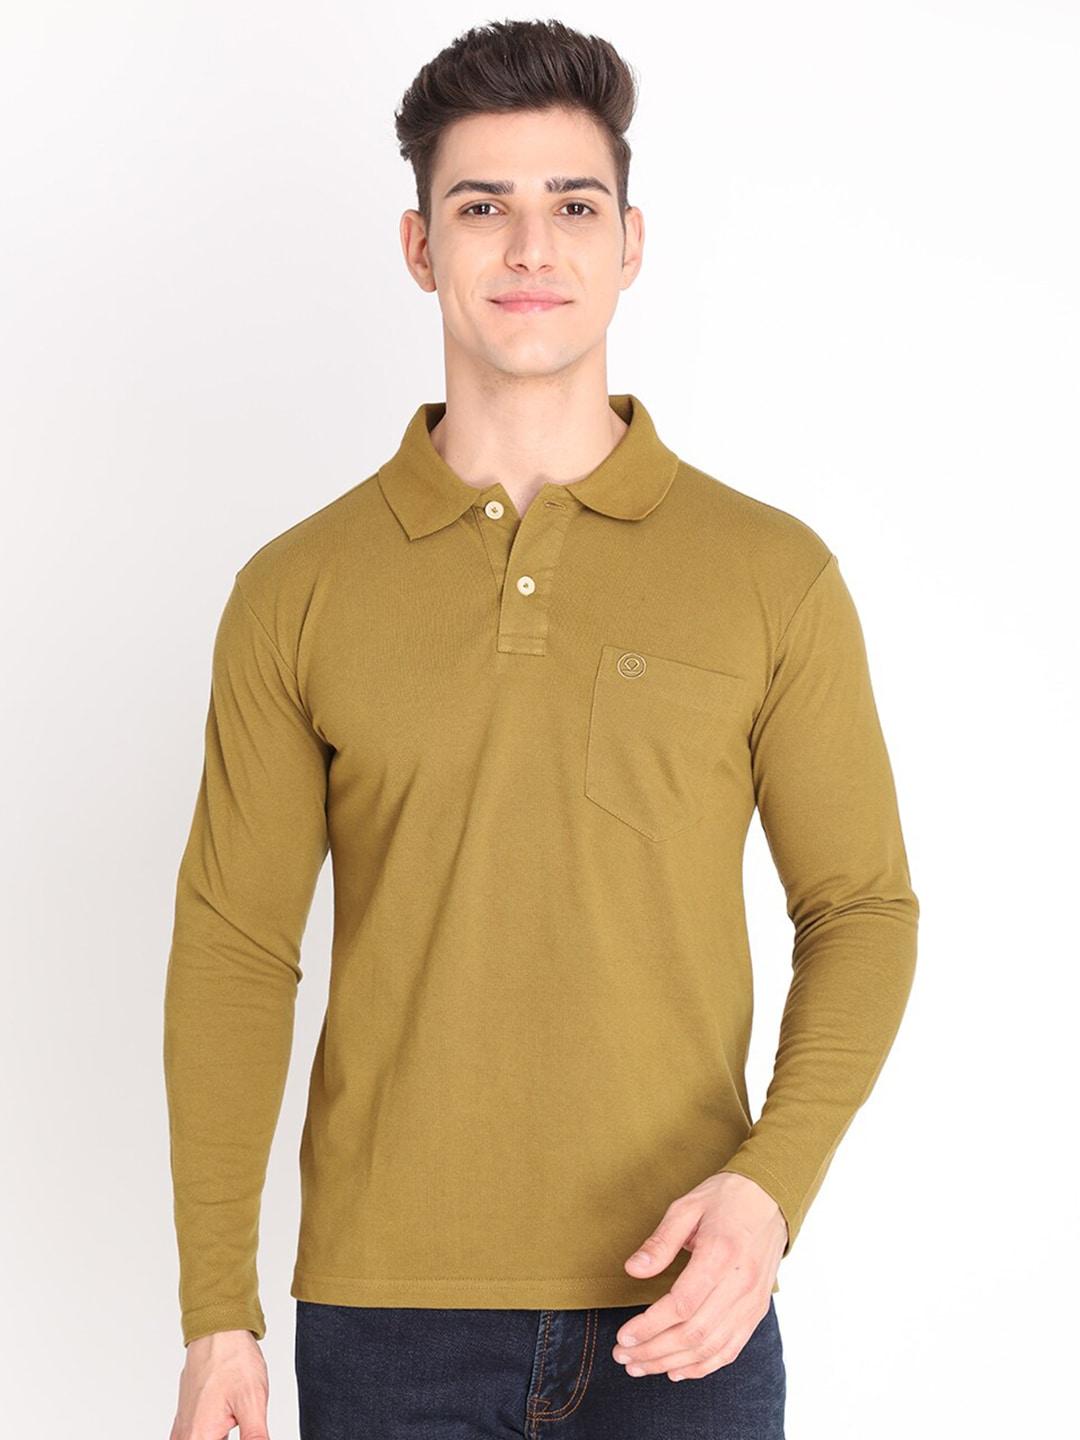 chkokko-men-olive-green-solid-polo-collar-cotton-regular-fit-outdoor-t-shirt